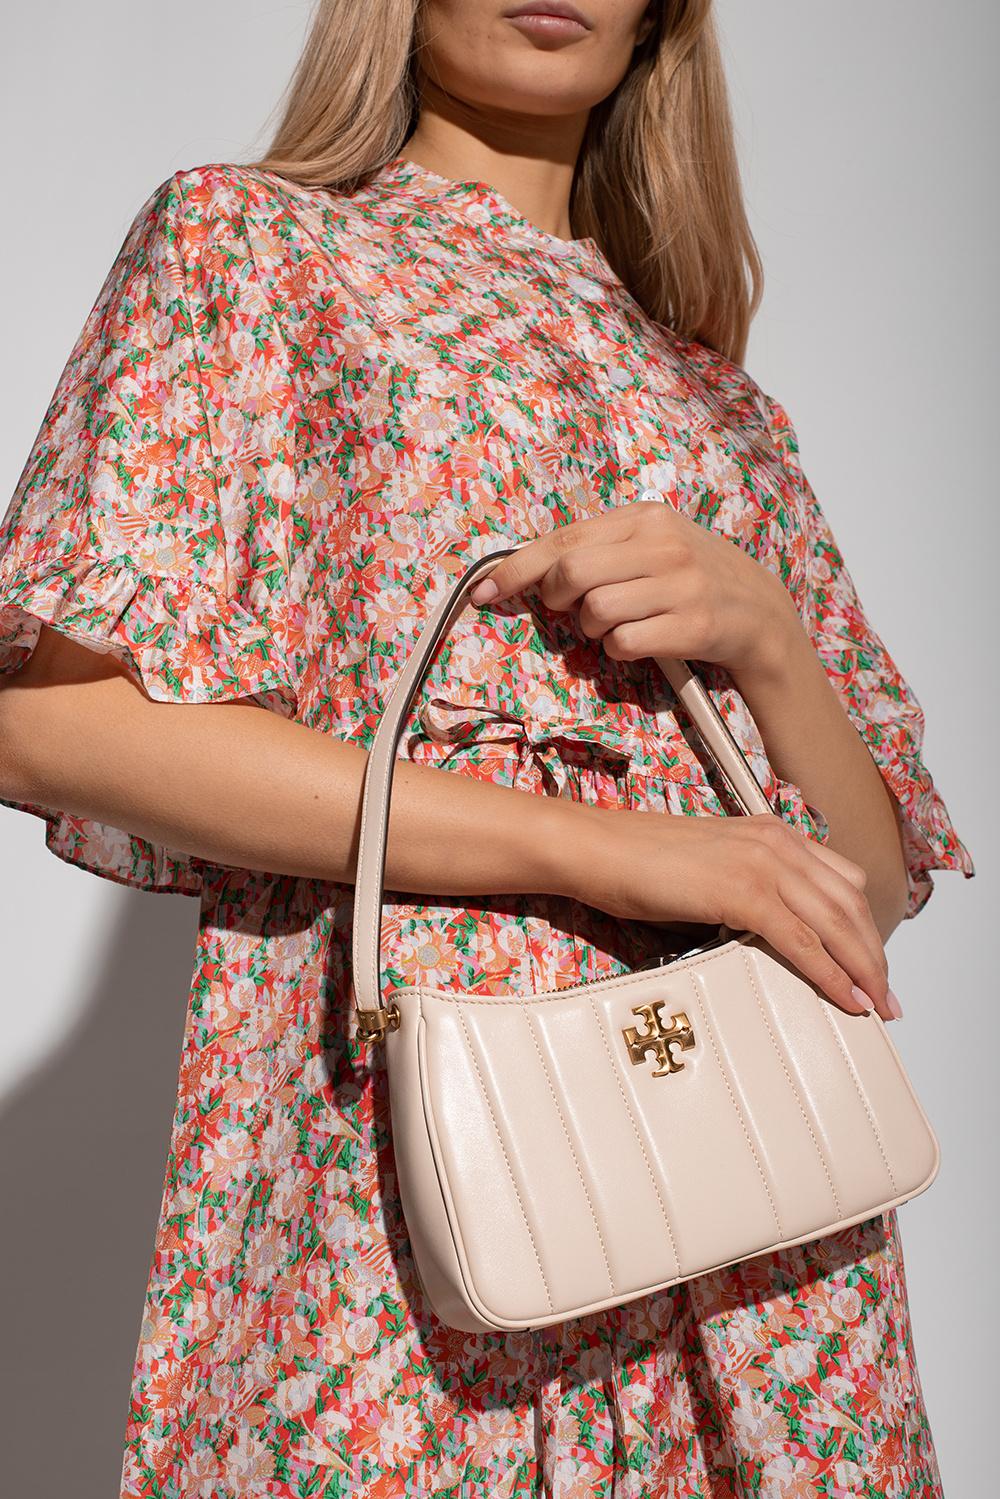 Kira Small Leather Shoulder Bag in Beige - Tory Burch